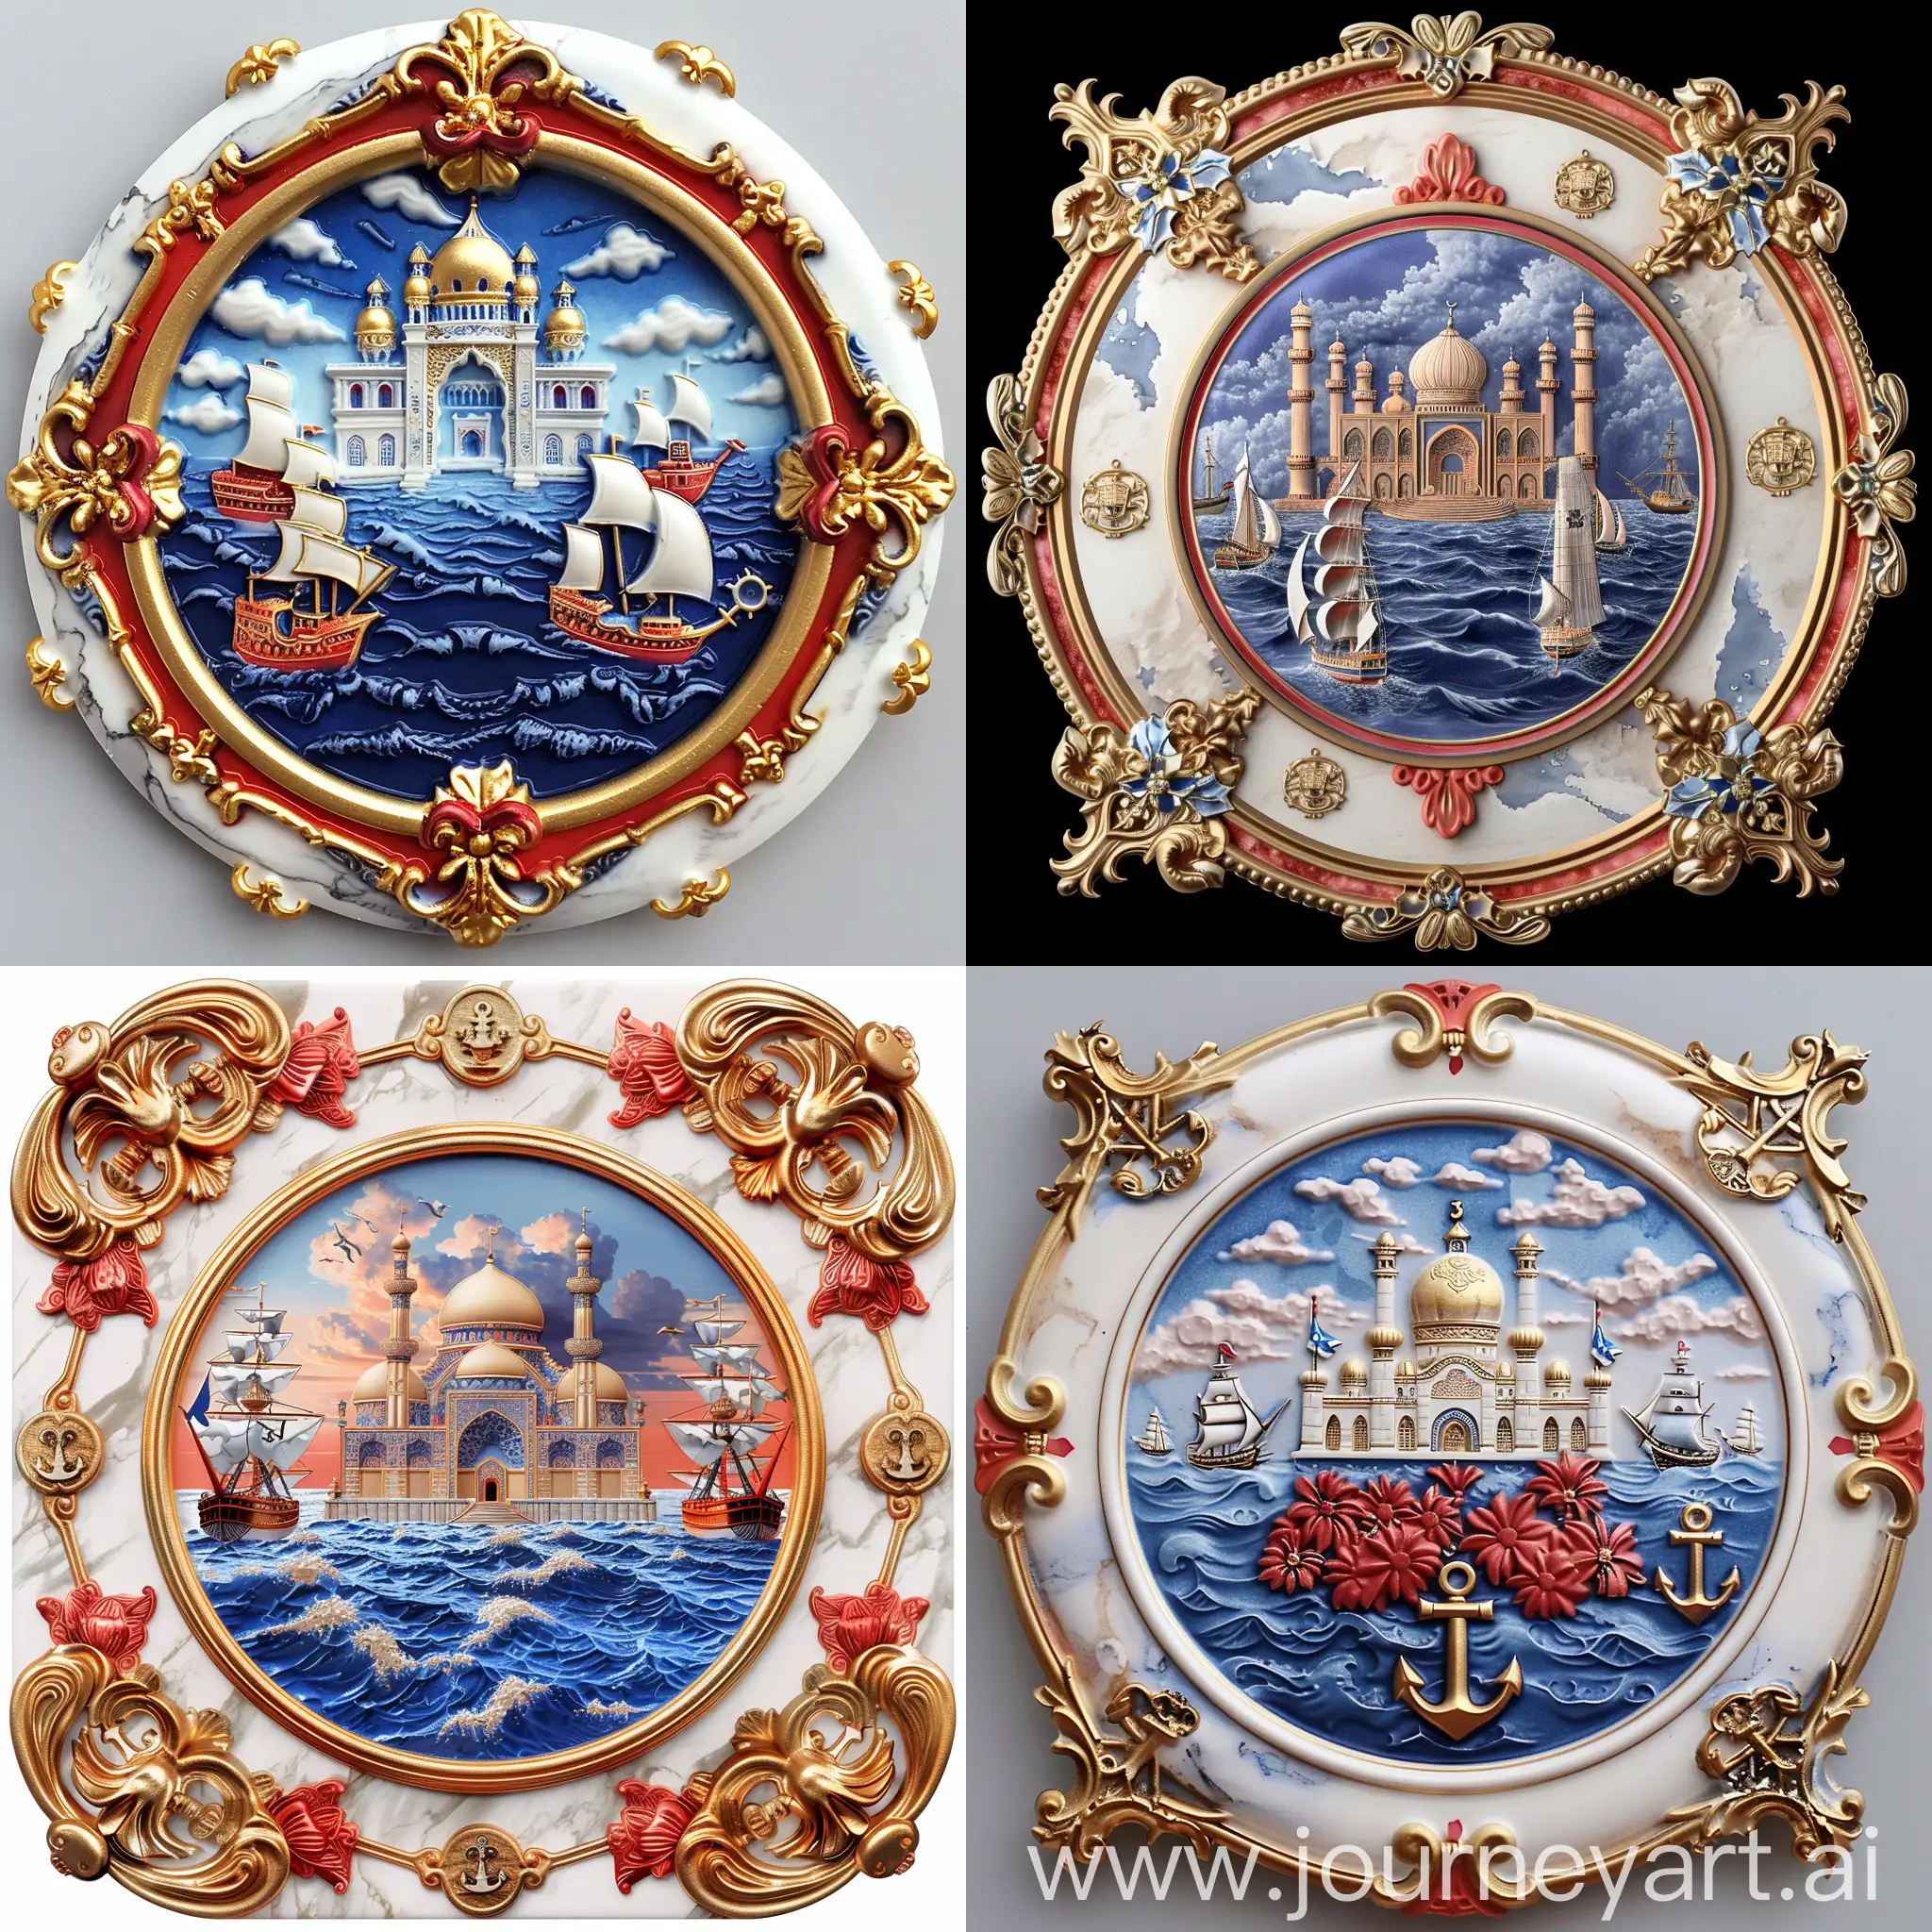 a pirates styled arabesque shaped round porcelain medal, inframing 3d embossed style painting of a Persian mosque beyond sea with ships, Symmetric front perspective, solid red blue Persian floral design with golden outline embossed on torus moulded white marbled border, 3d Naval symbols at corners, shiny metallic gold framed, iznik decorations around medallion